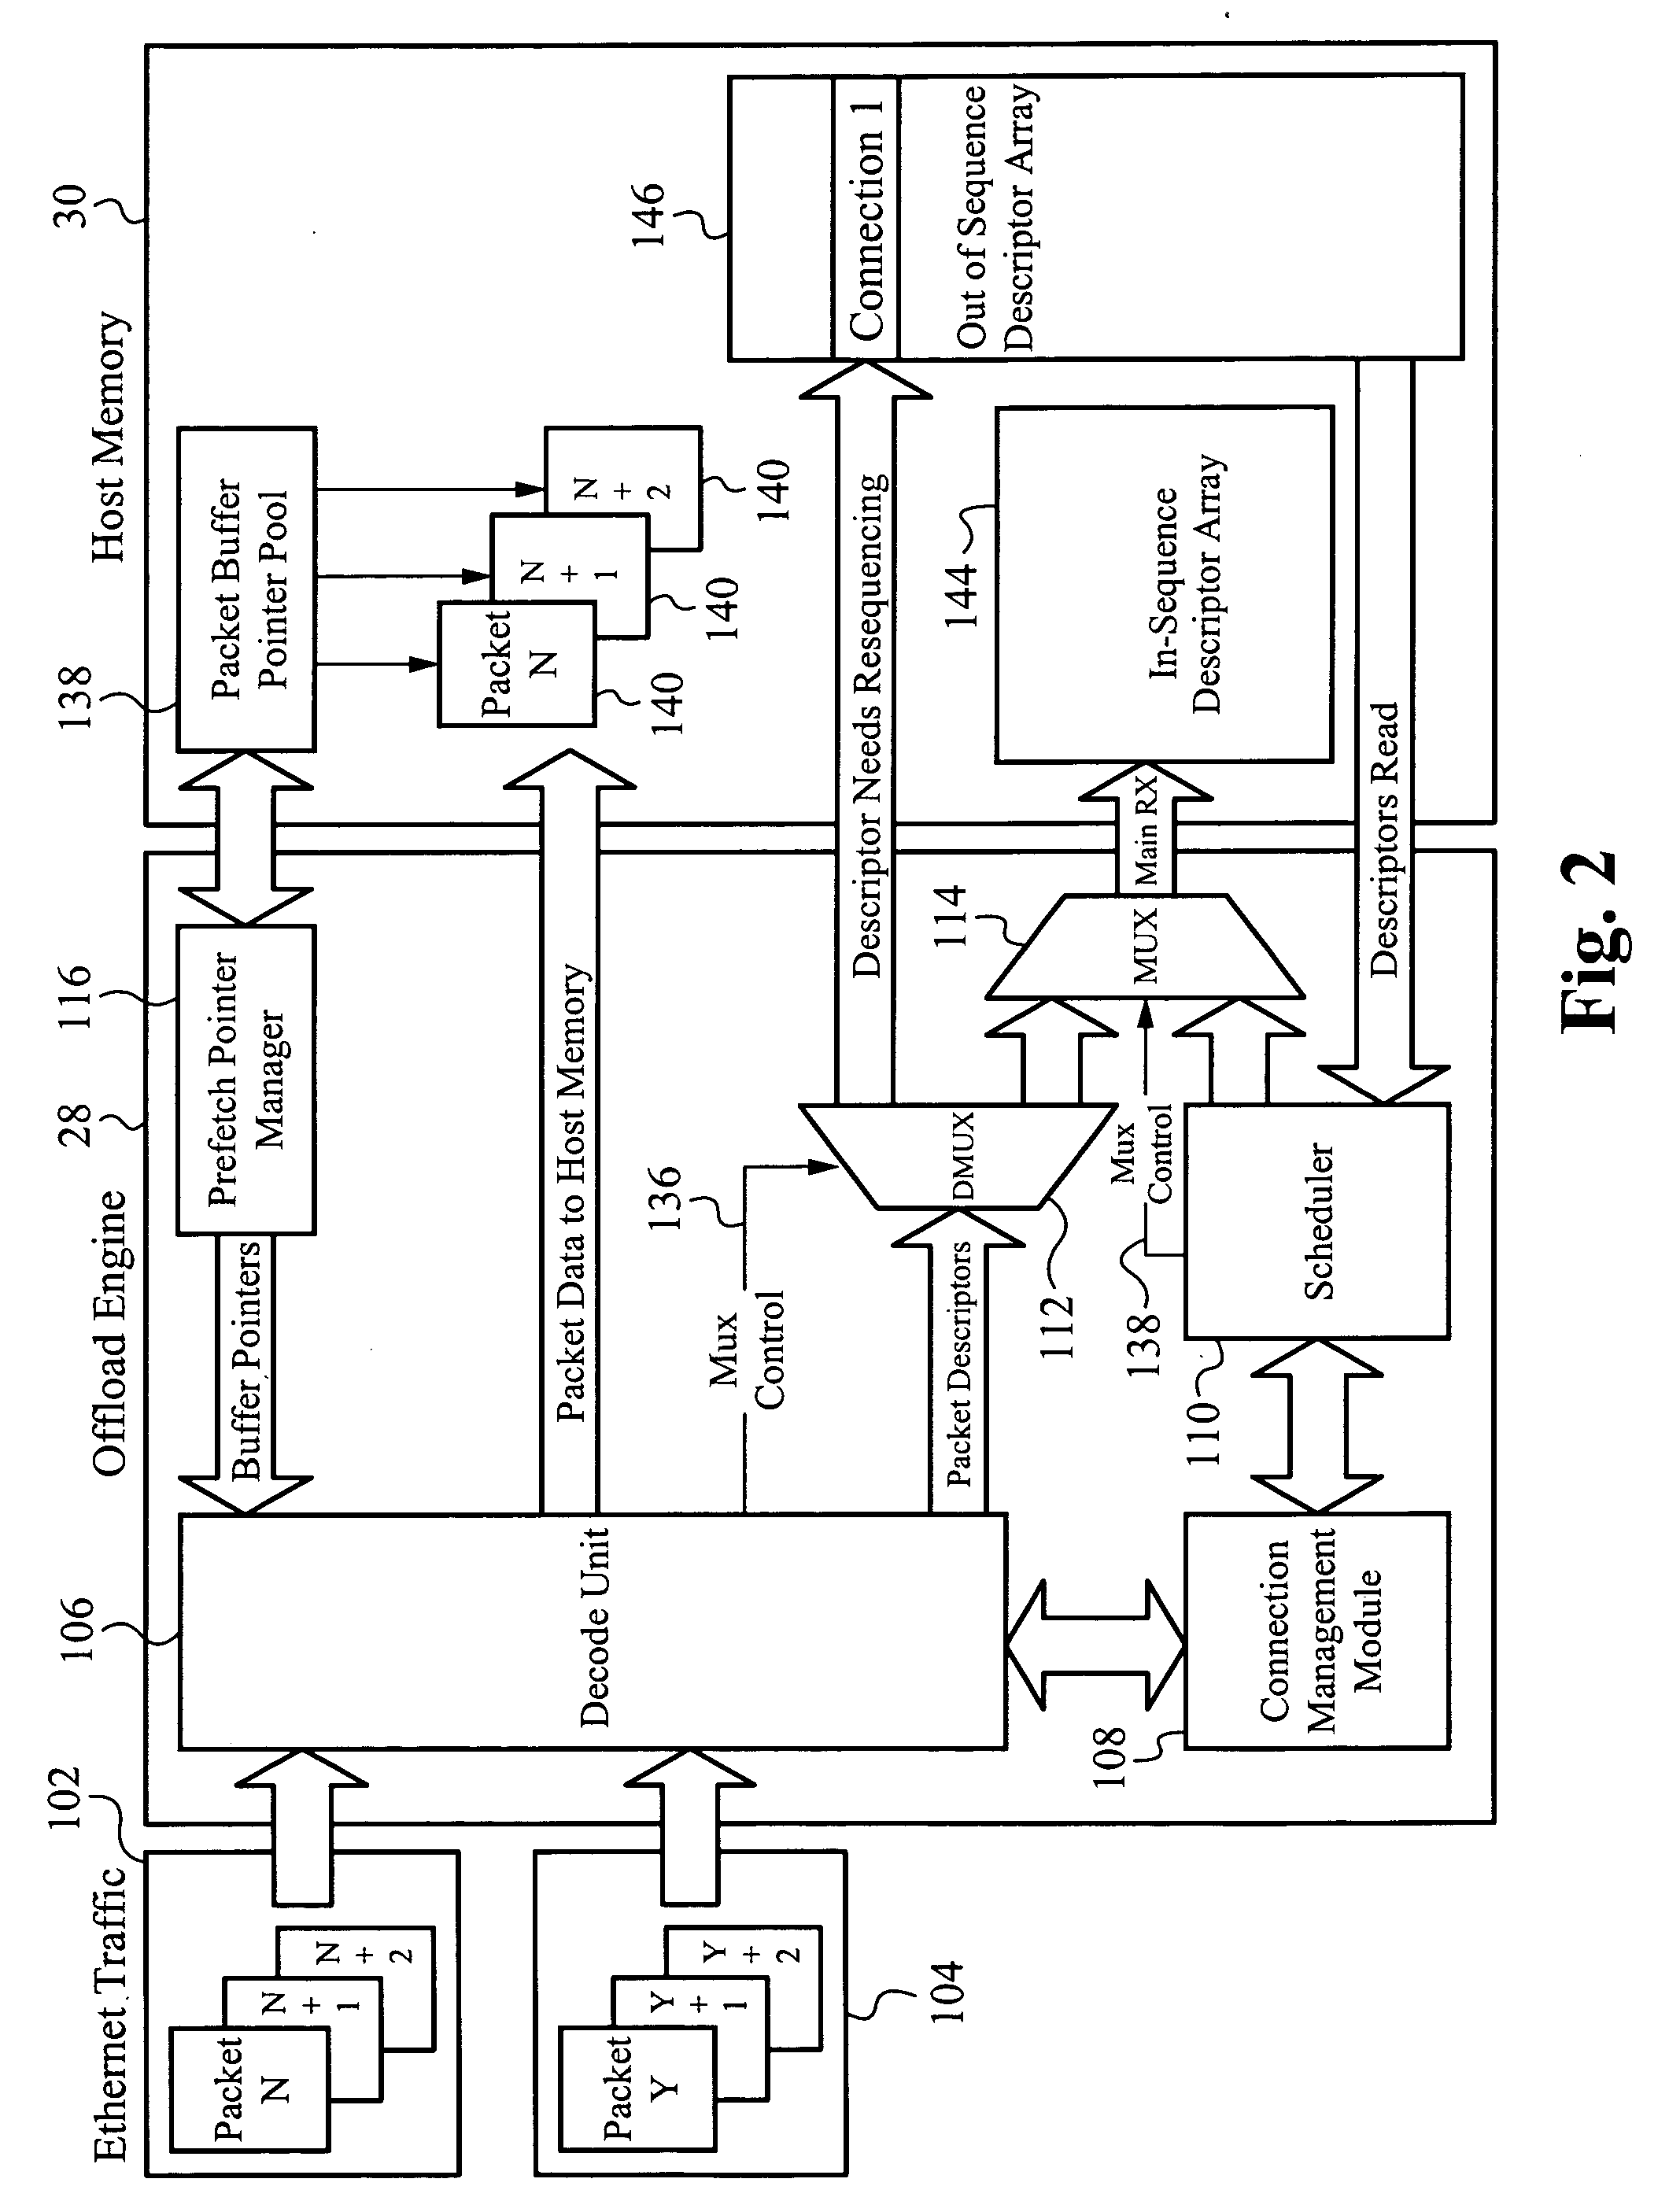 Off-load engine to re-sequence data packets within host memory